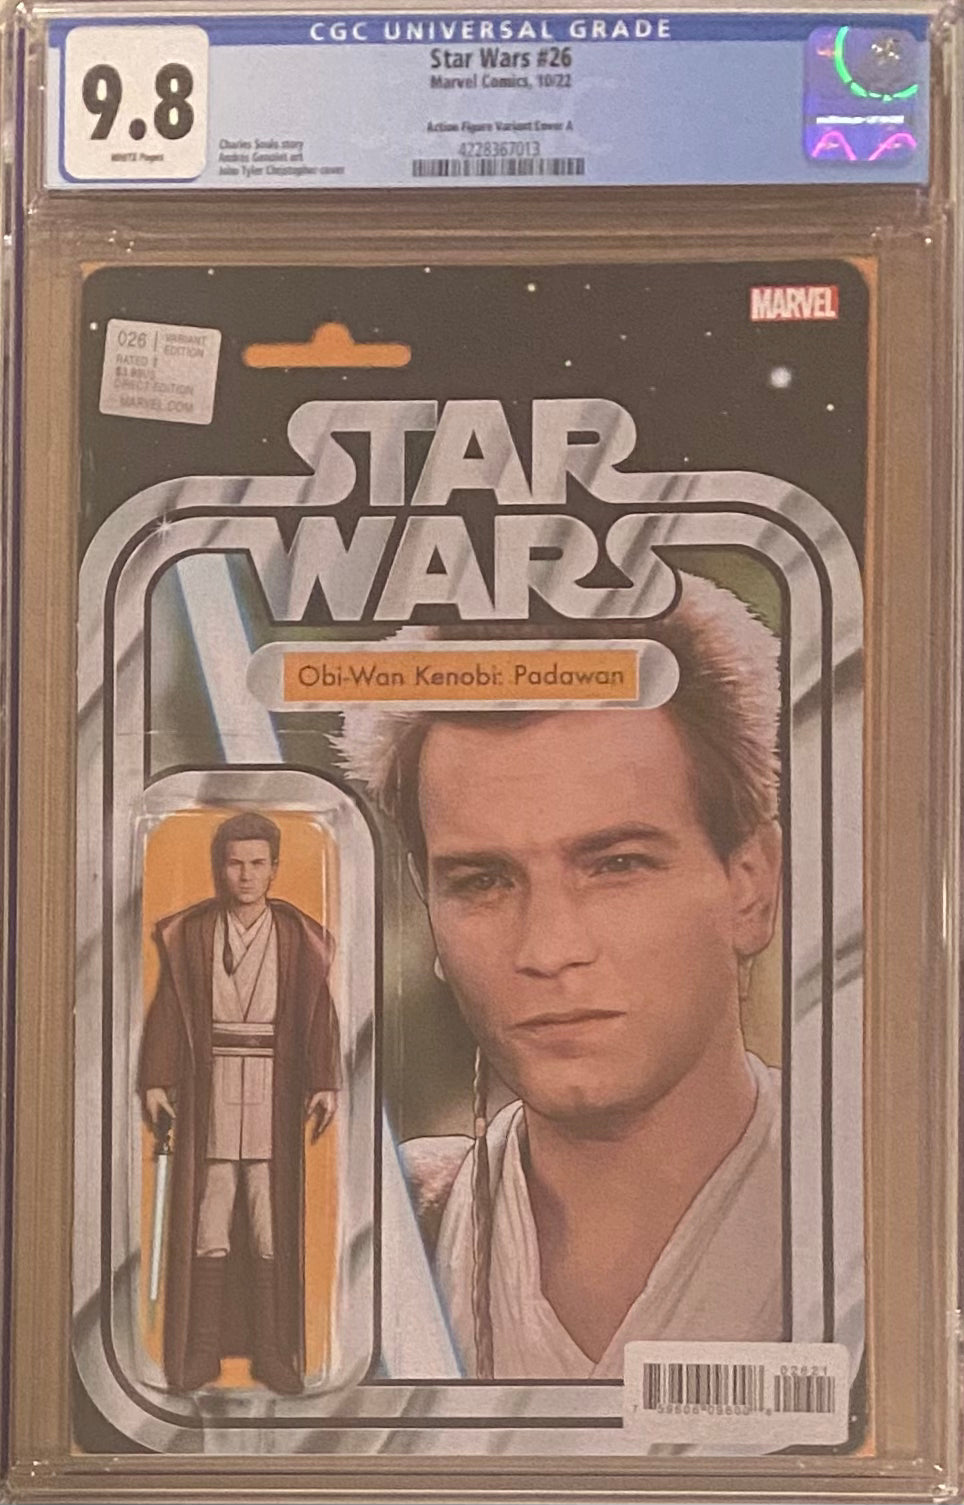 Star Wars #26 Action Figure Variant CGC 9.8 - Many First Appearances